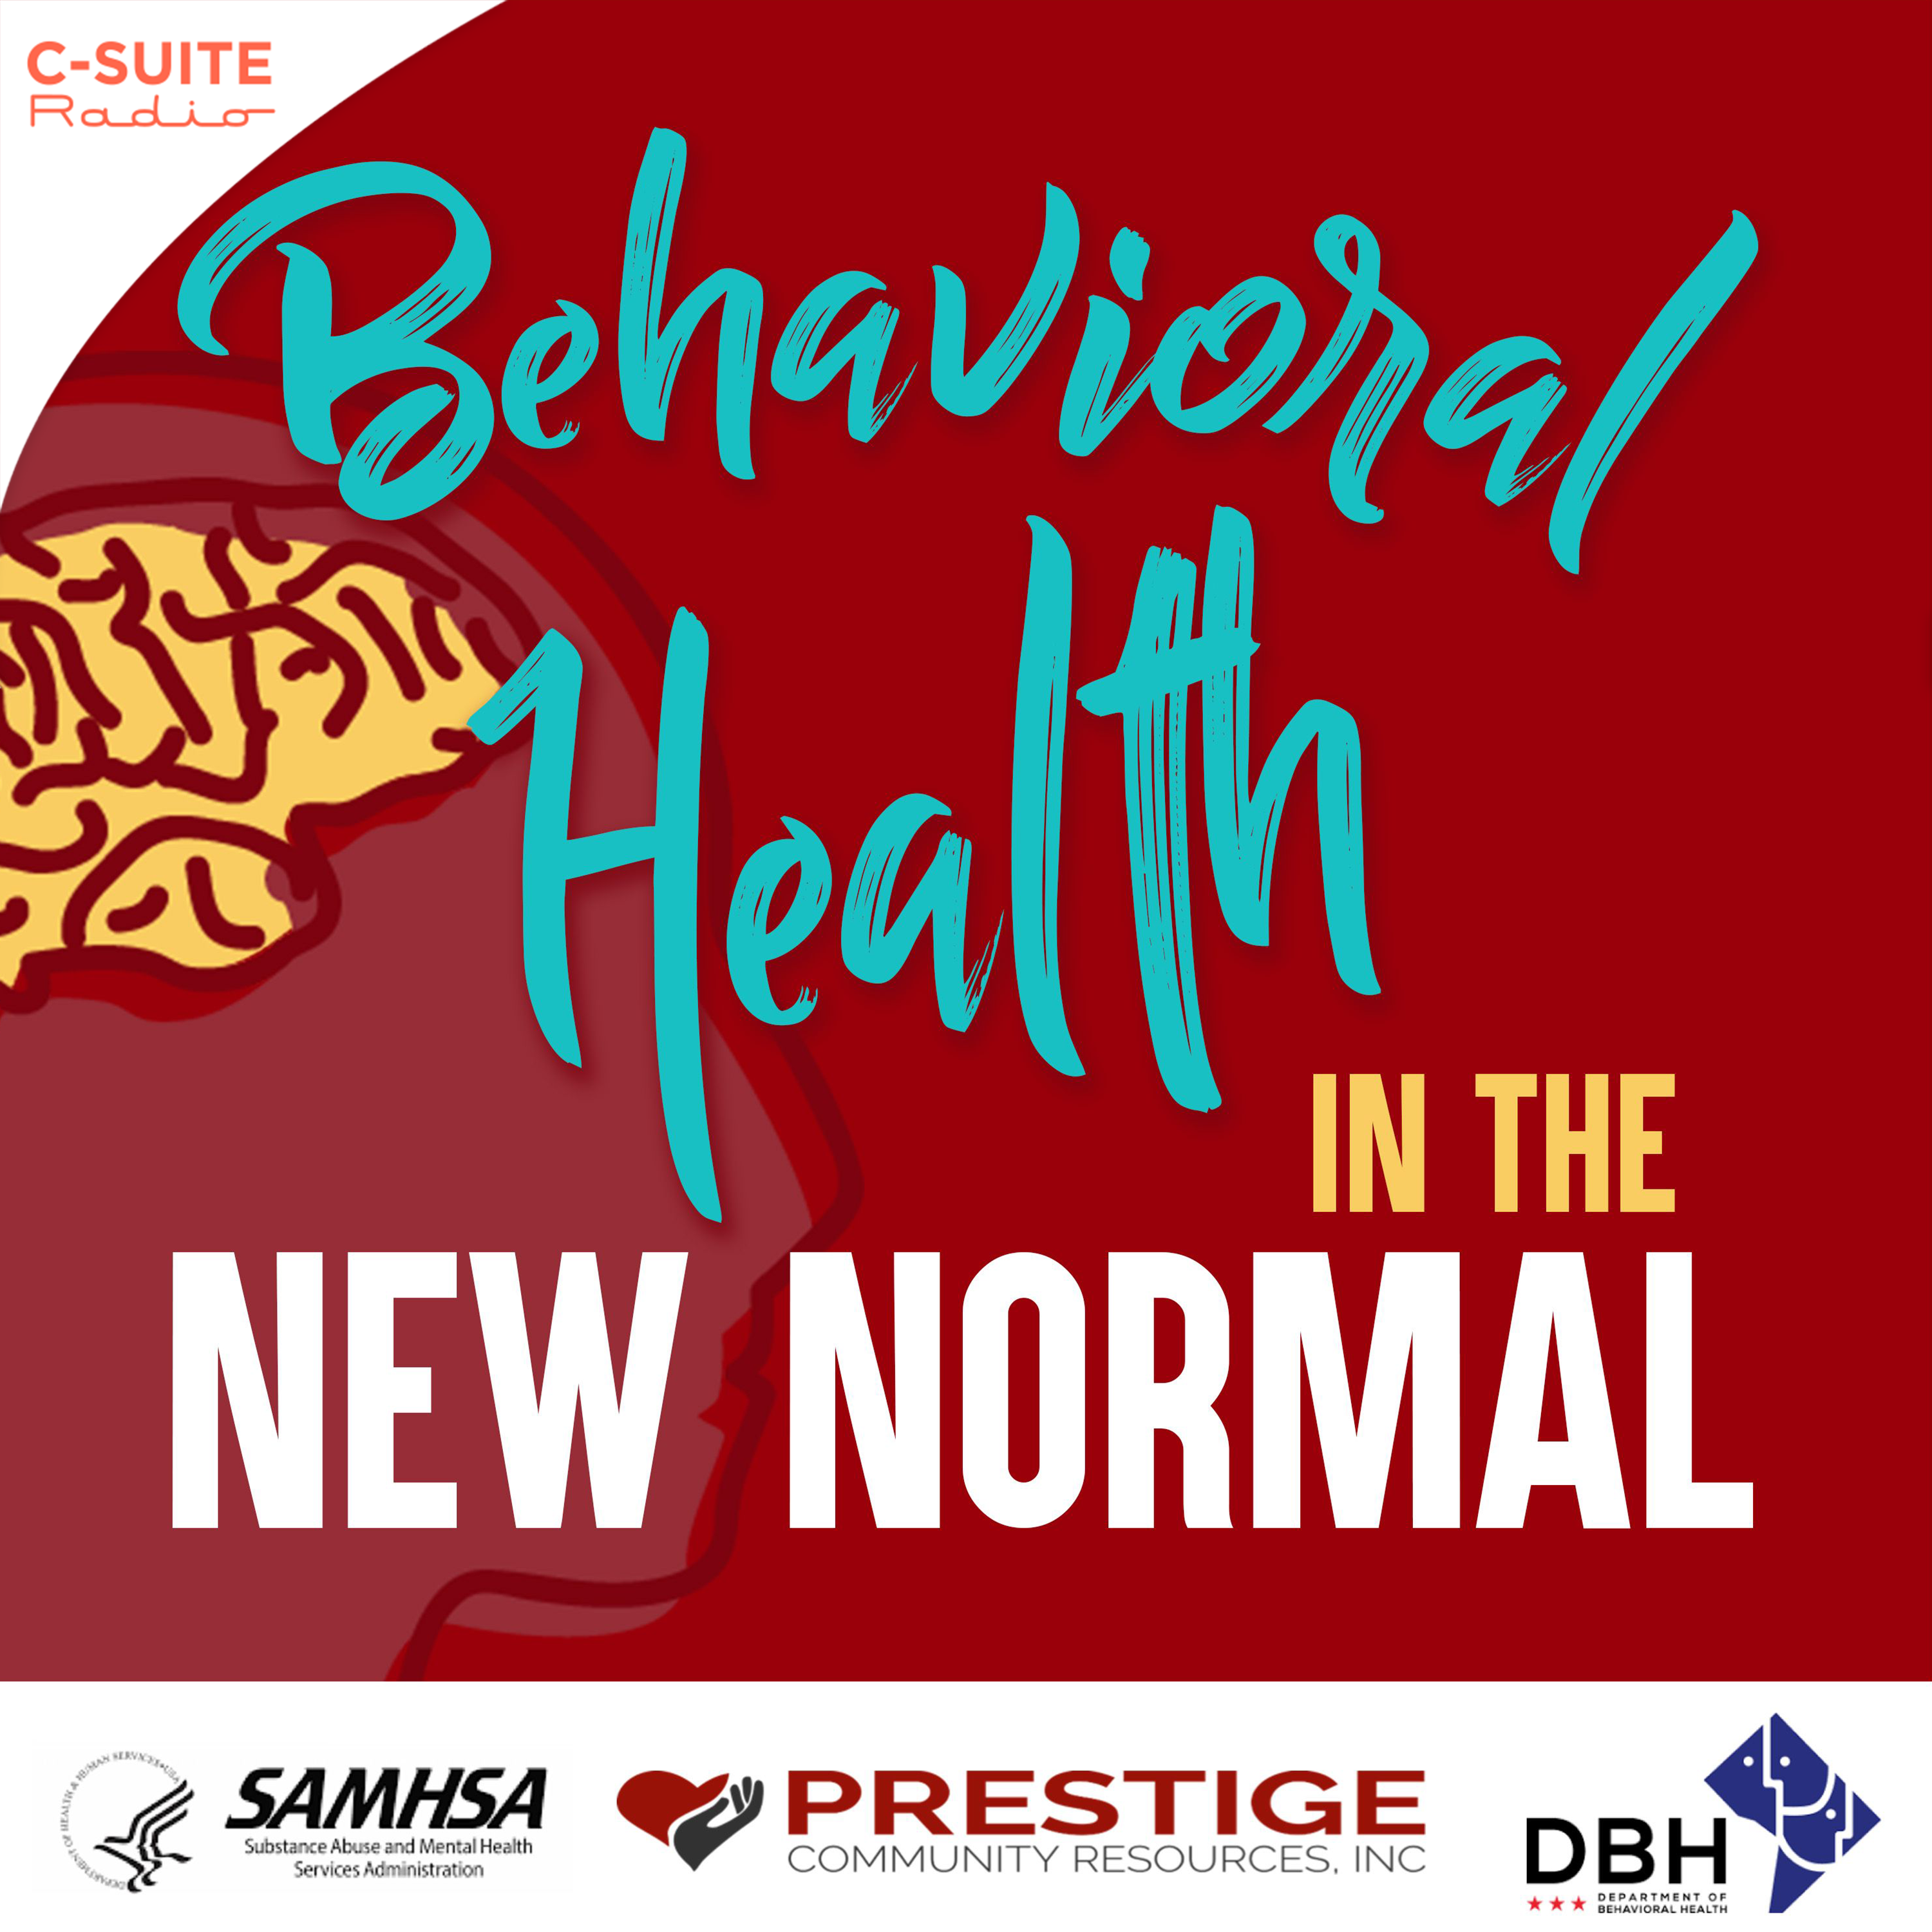 Behavioral Health in the New Normal